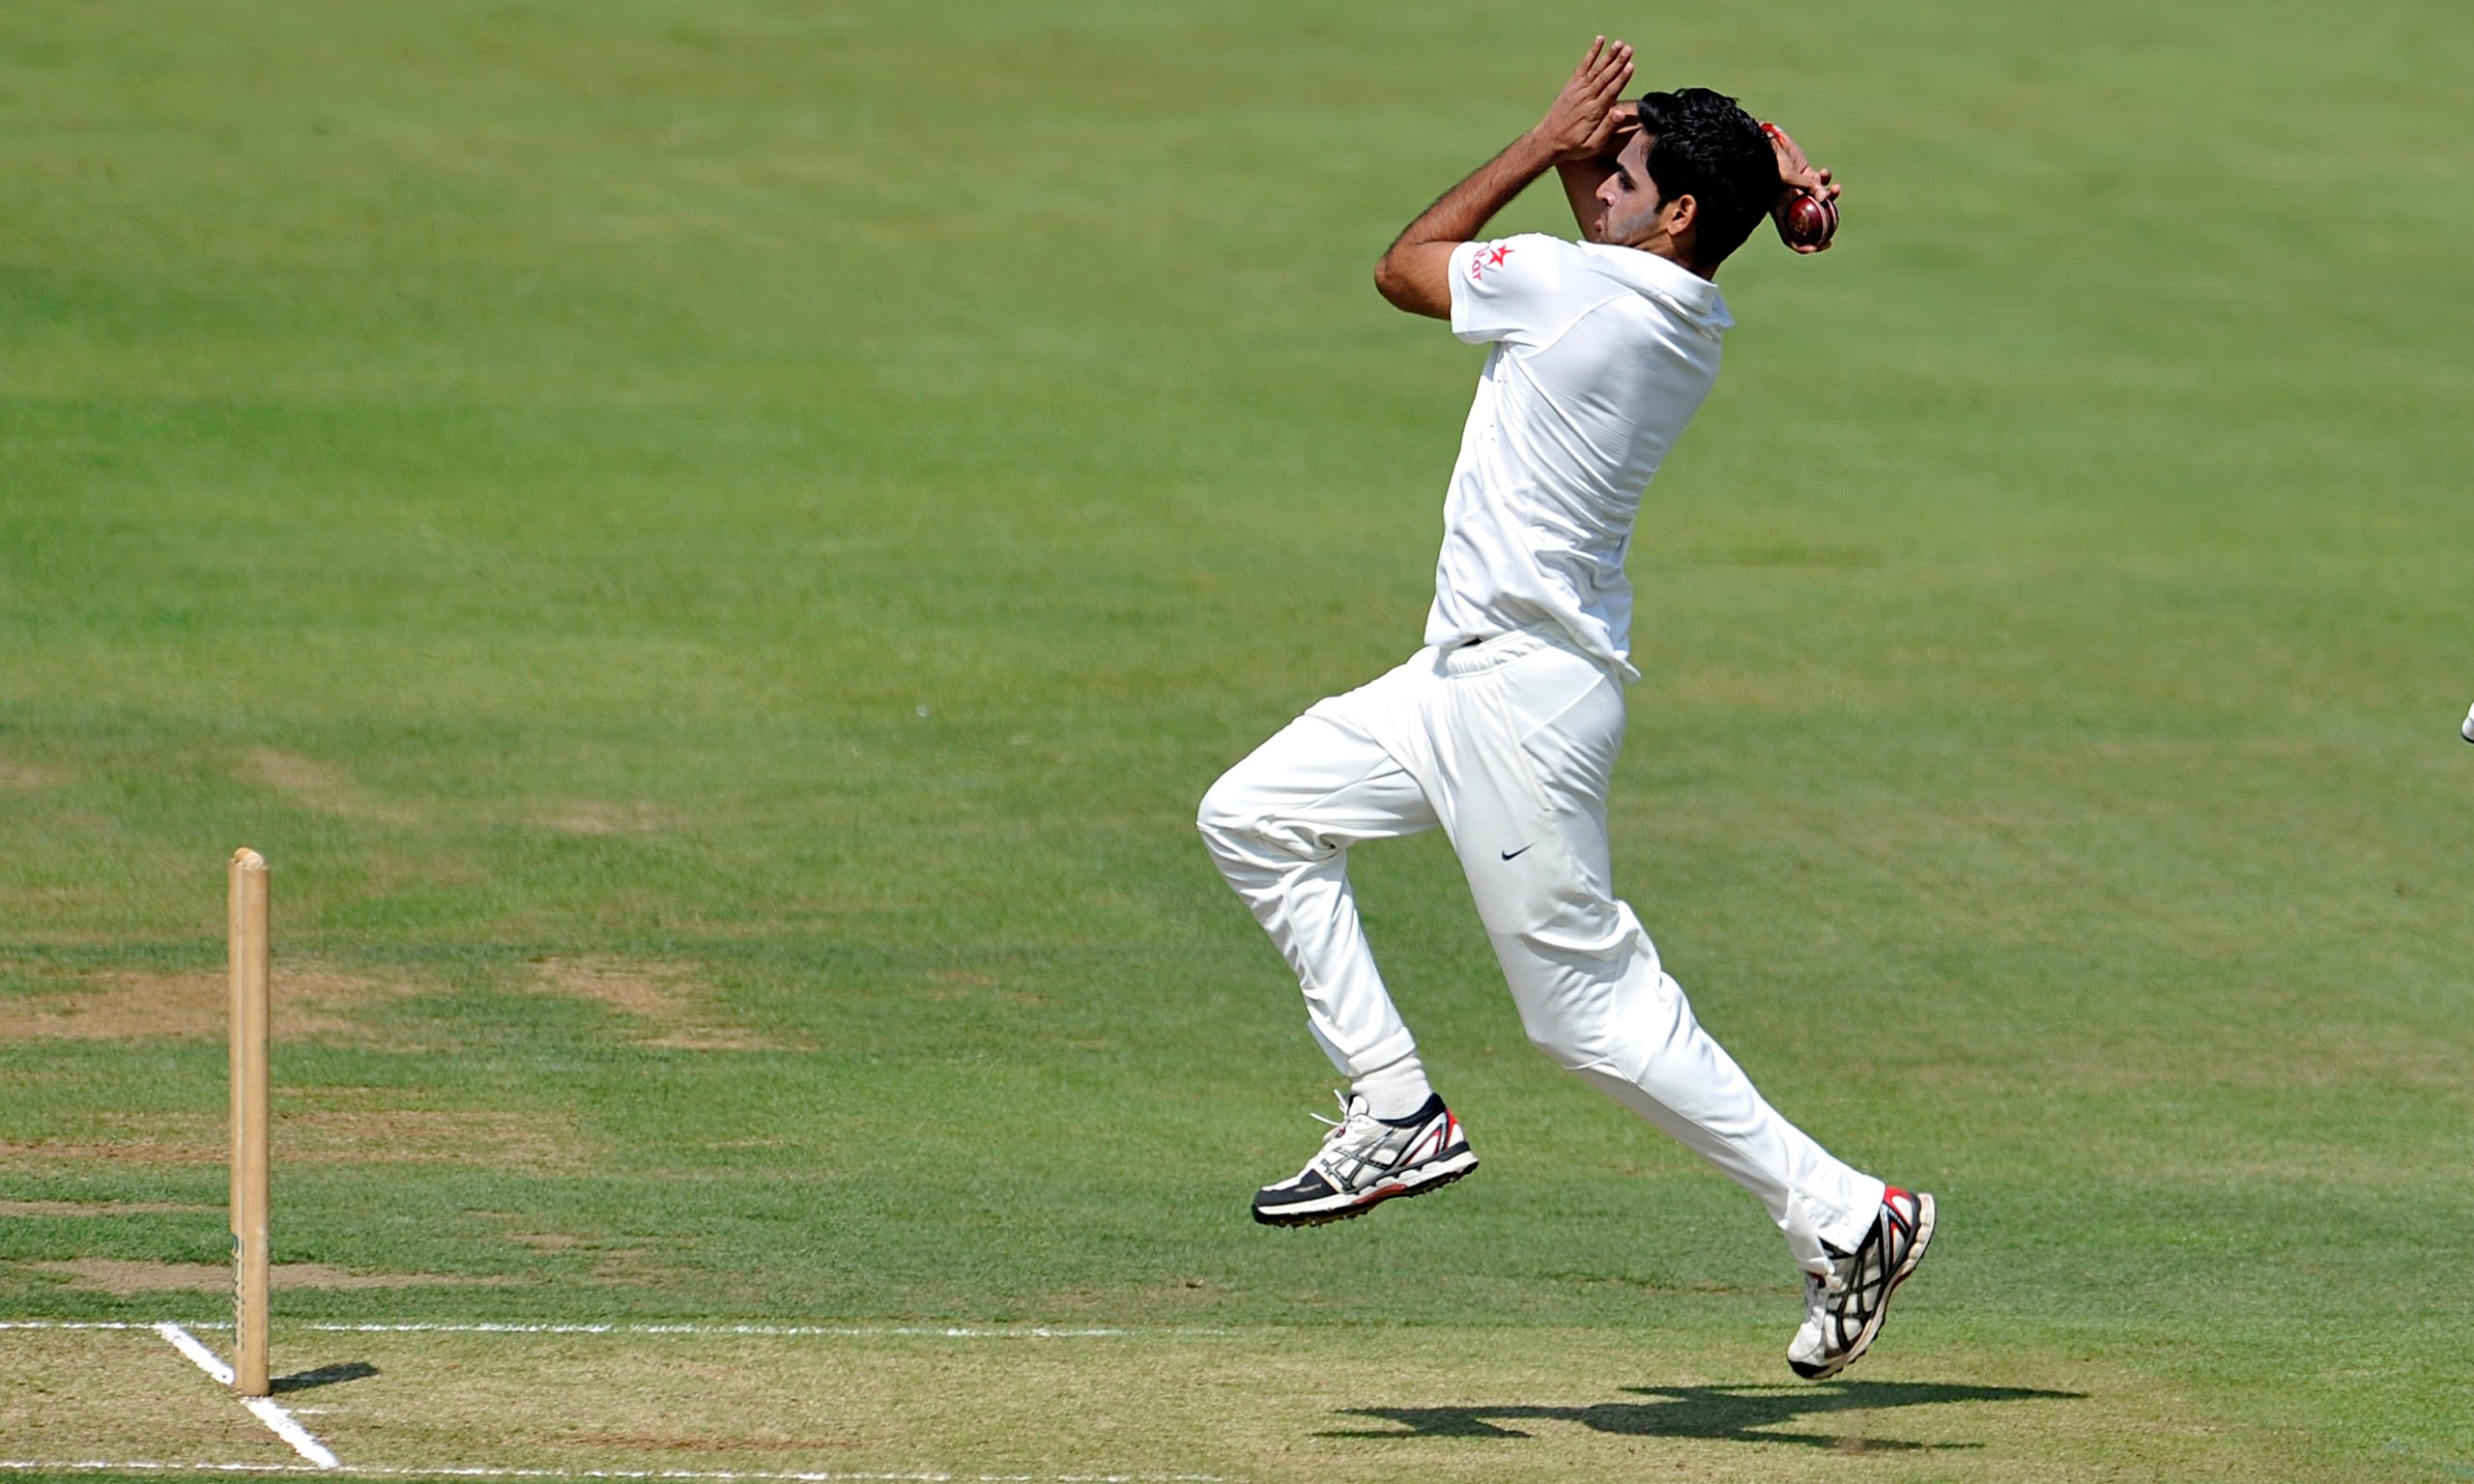 Short, nasty and brutish: The science behind Jofra Archer's bowling